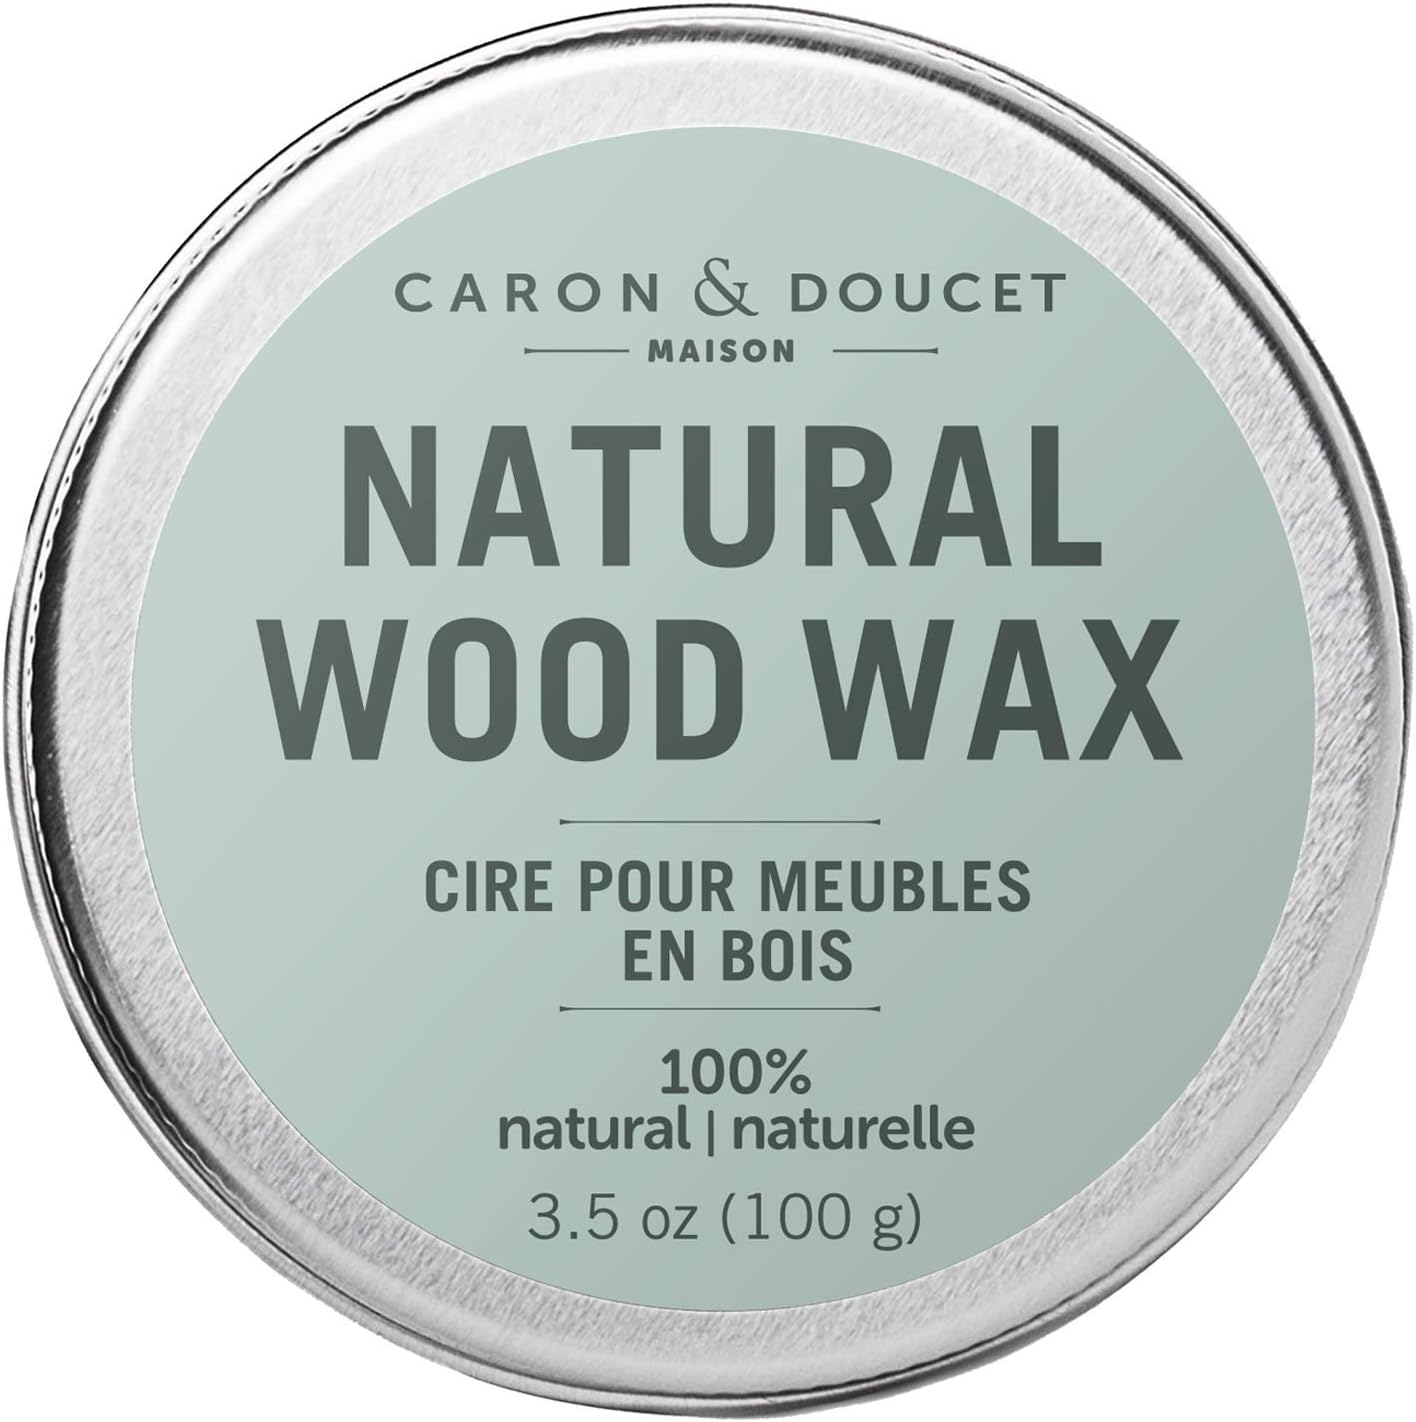 CARON & DOUCET - Natural Wood Conditioning Vegan Wax Finish - 100% Plant Based Wood Conditioning and Polishing Wax Finish - Orange Scented - Suitable for Natural Wood Furniture. (3.5oz)